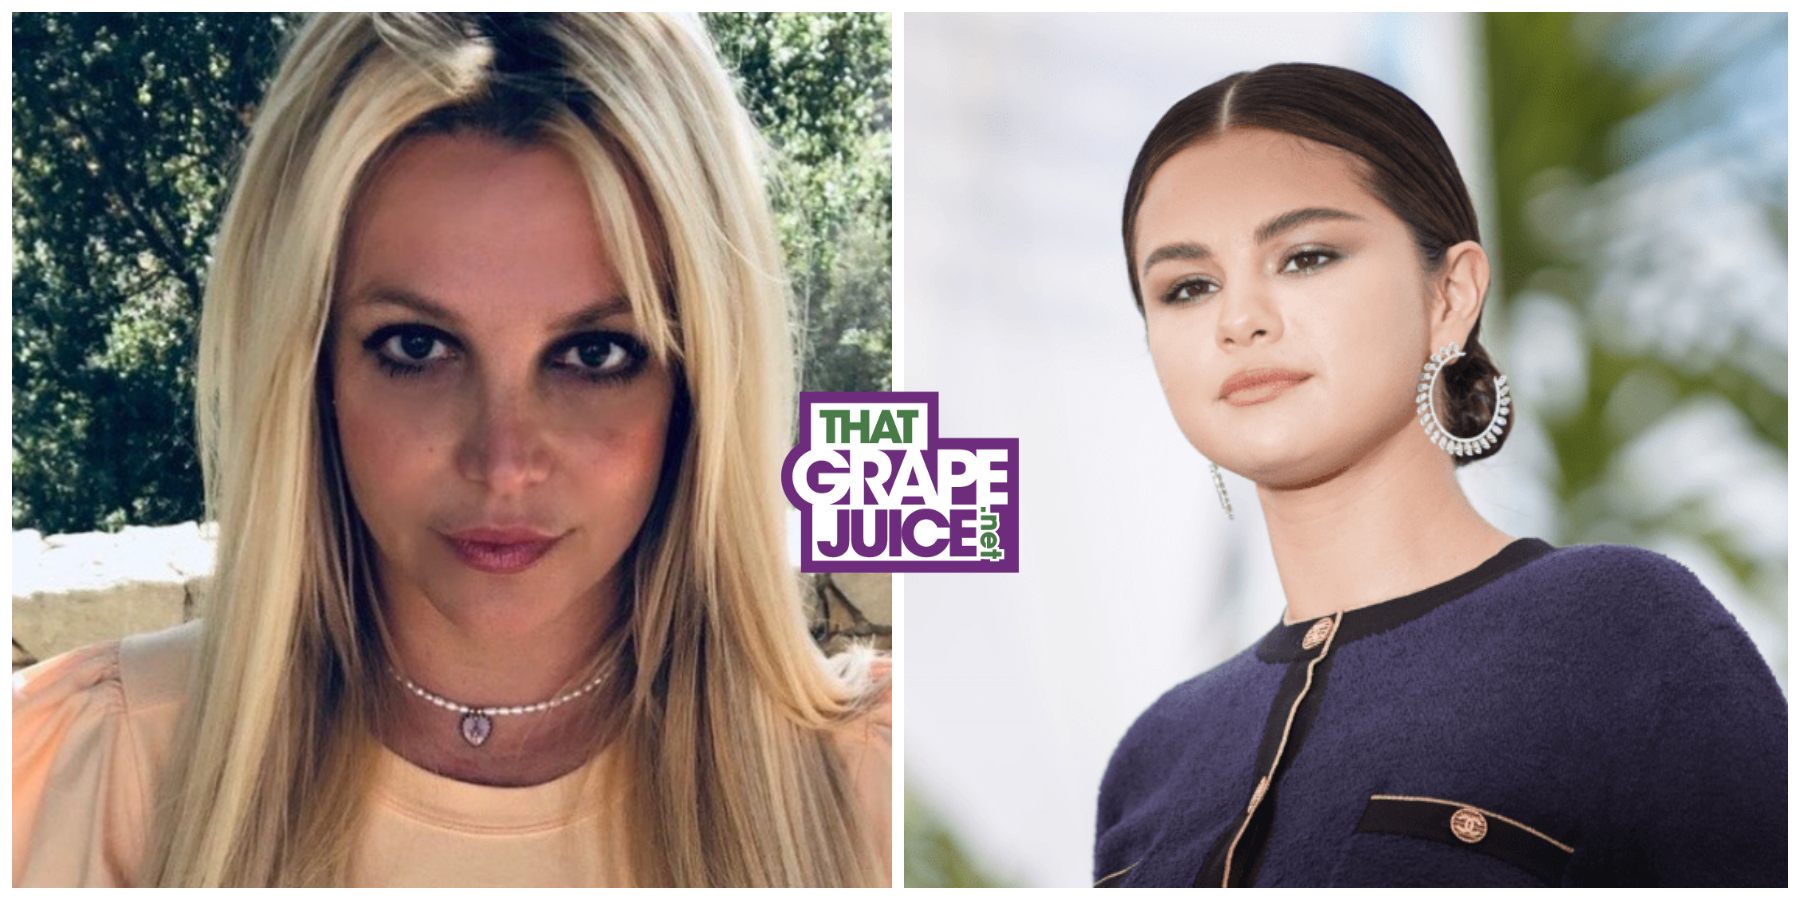 ‘She’s a 40-Year-Old Bully!’: Britney Spears Slammed By Selena Gomez Fans For Alleged Instagram Diss